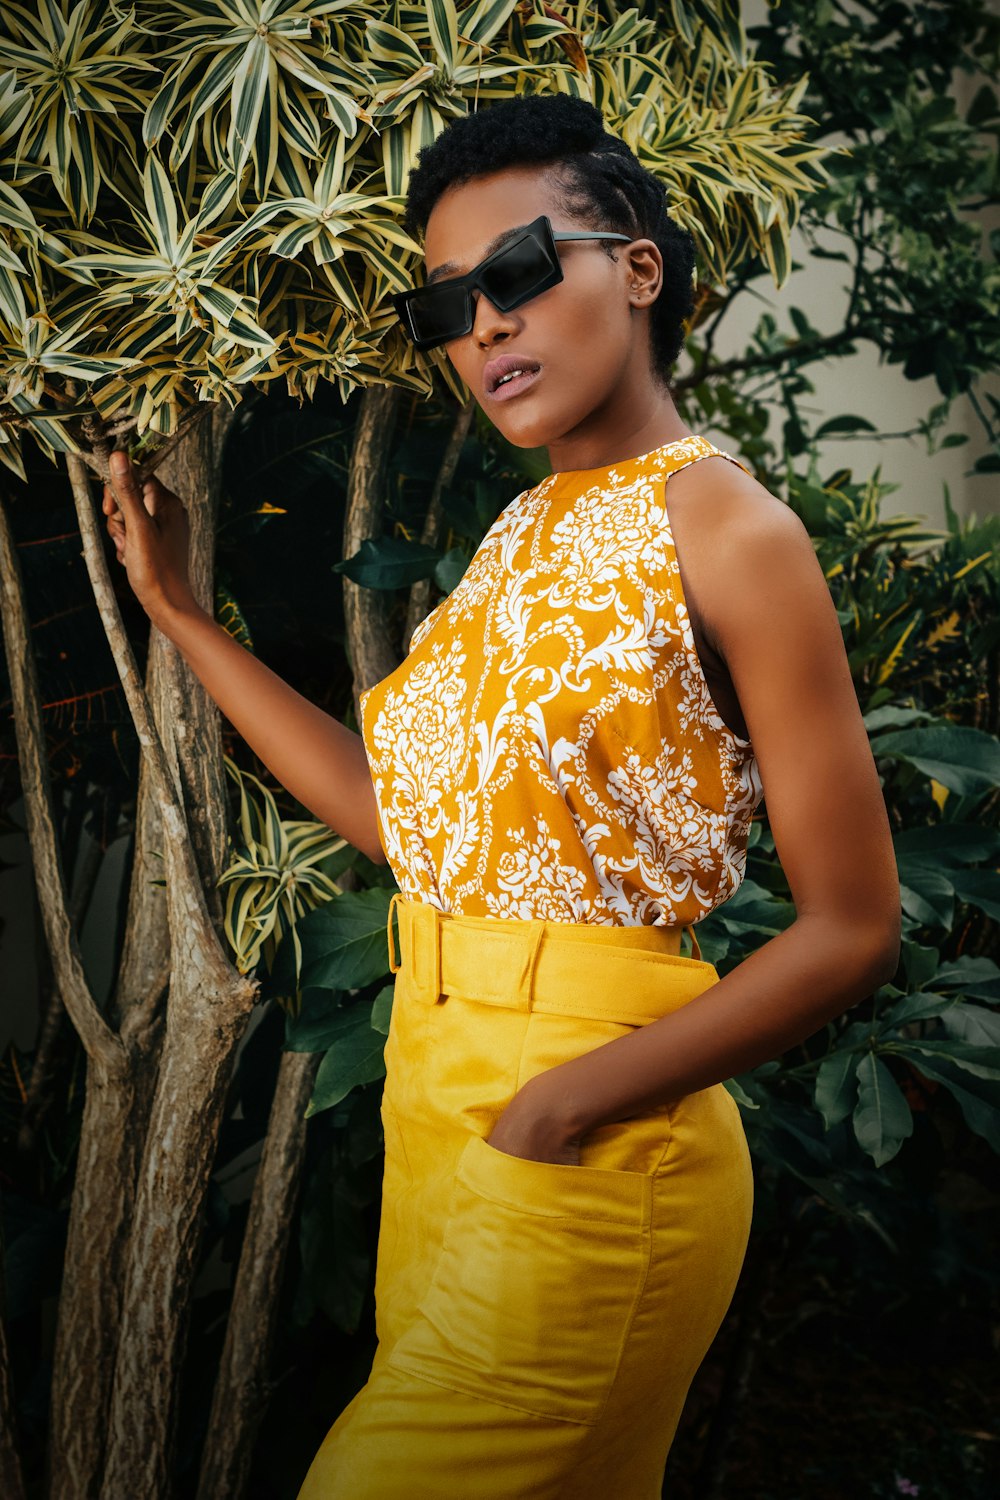 a woman wearing a yellow dress and sunglasses standing next to a tree